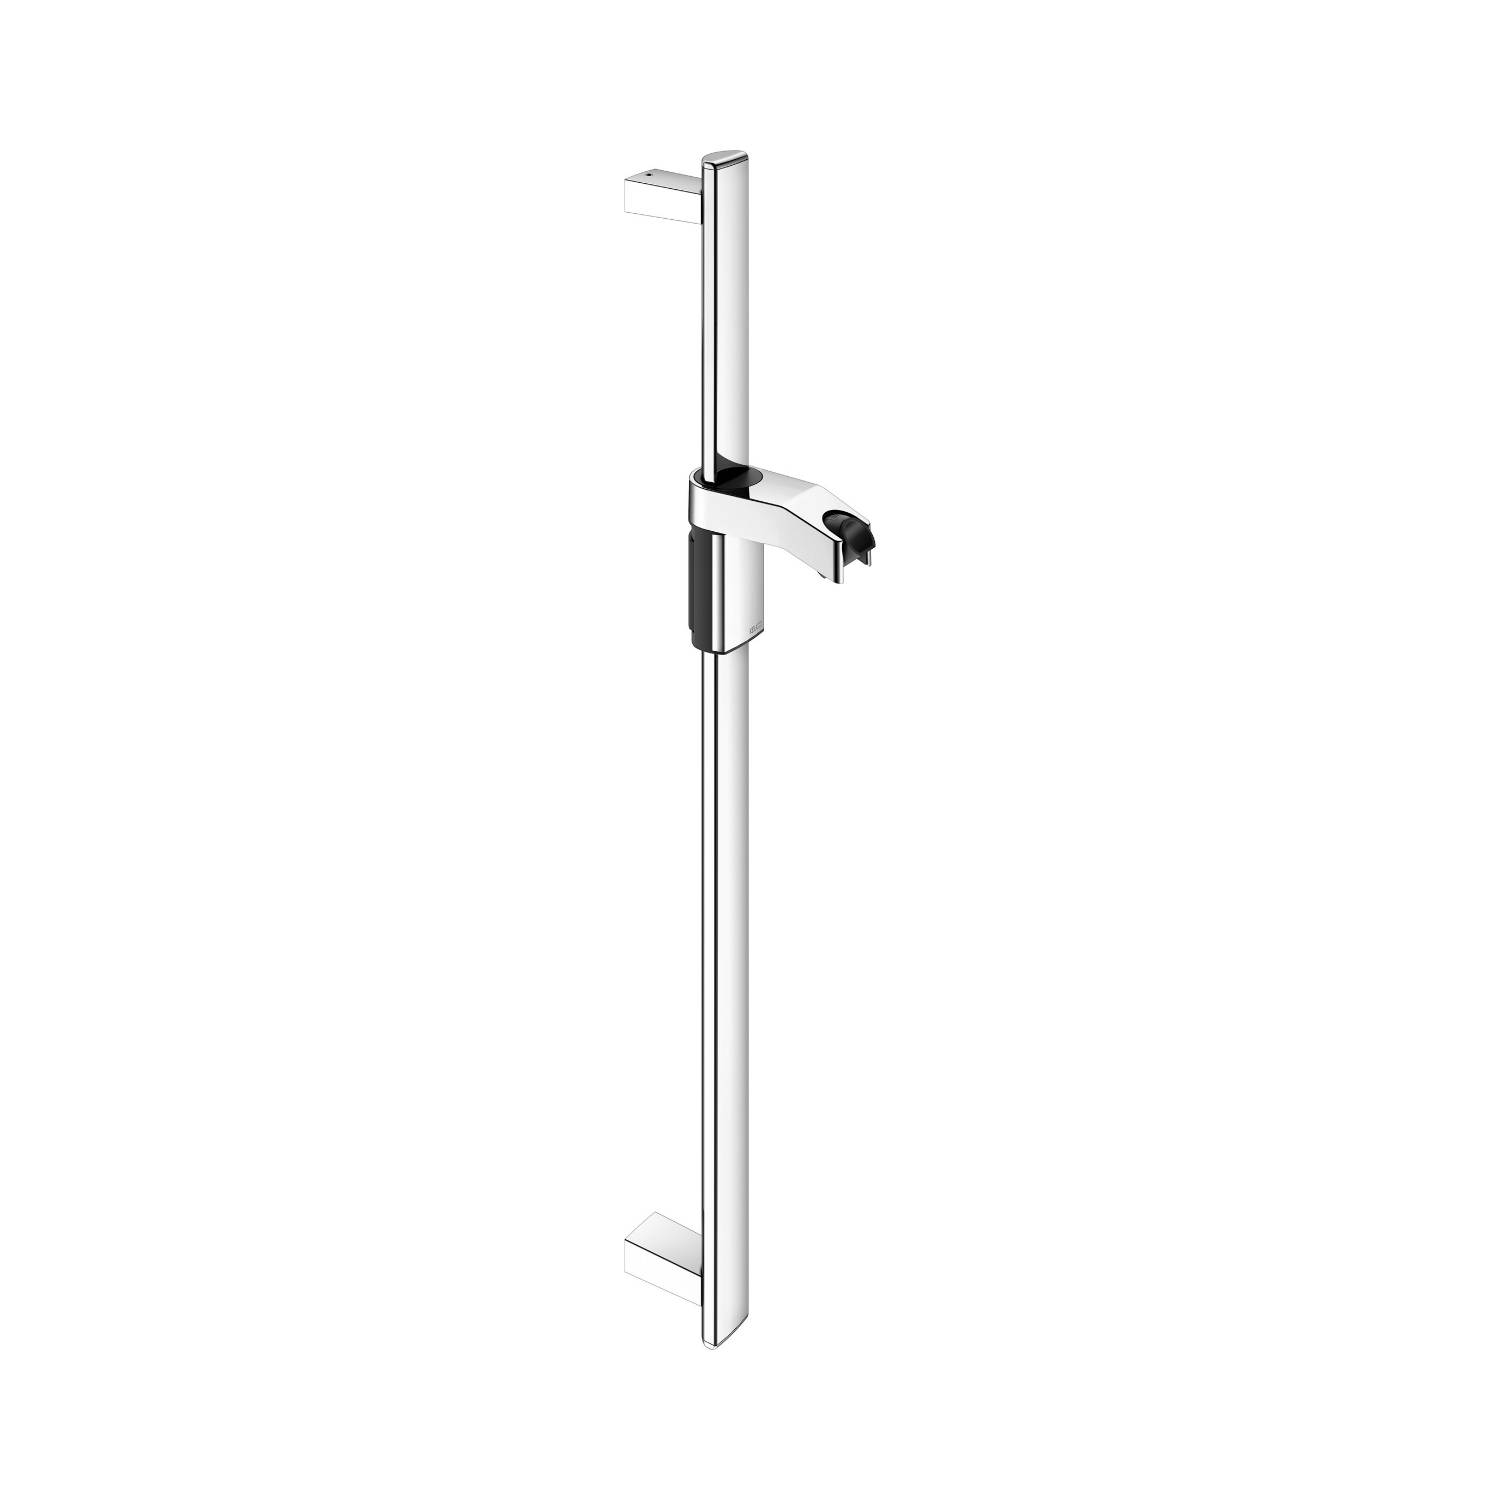 Hand shower sliding rail complete with hand-shower bracket - AXESS - Hand shower sliding rail